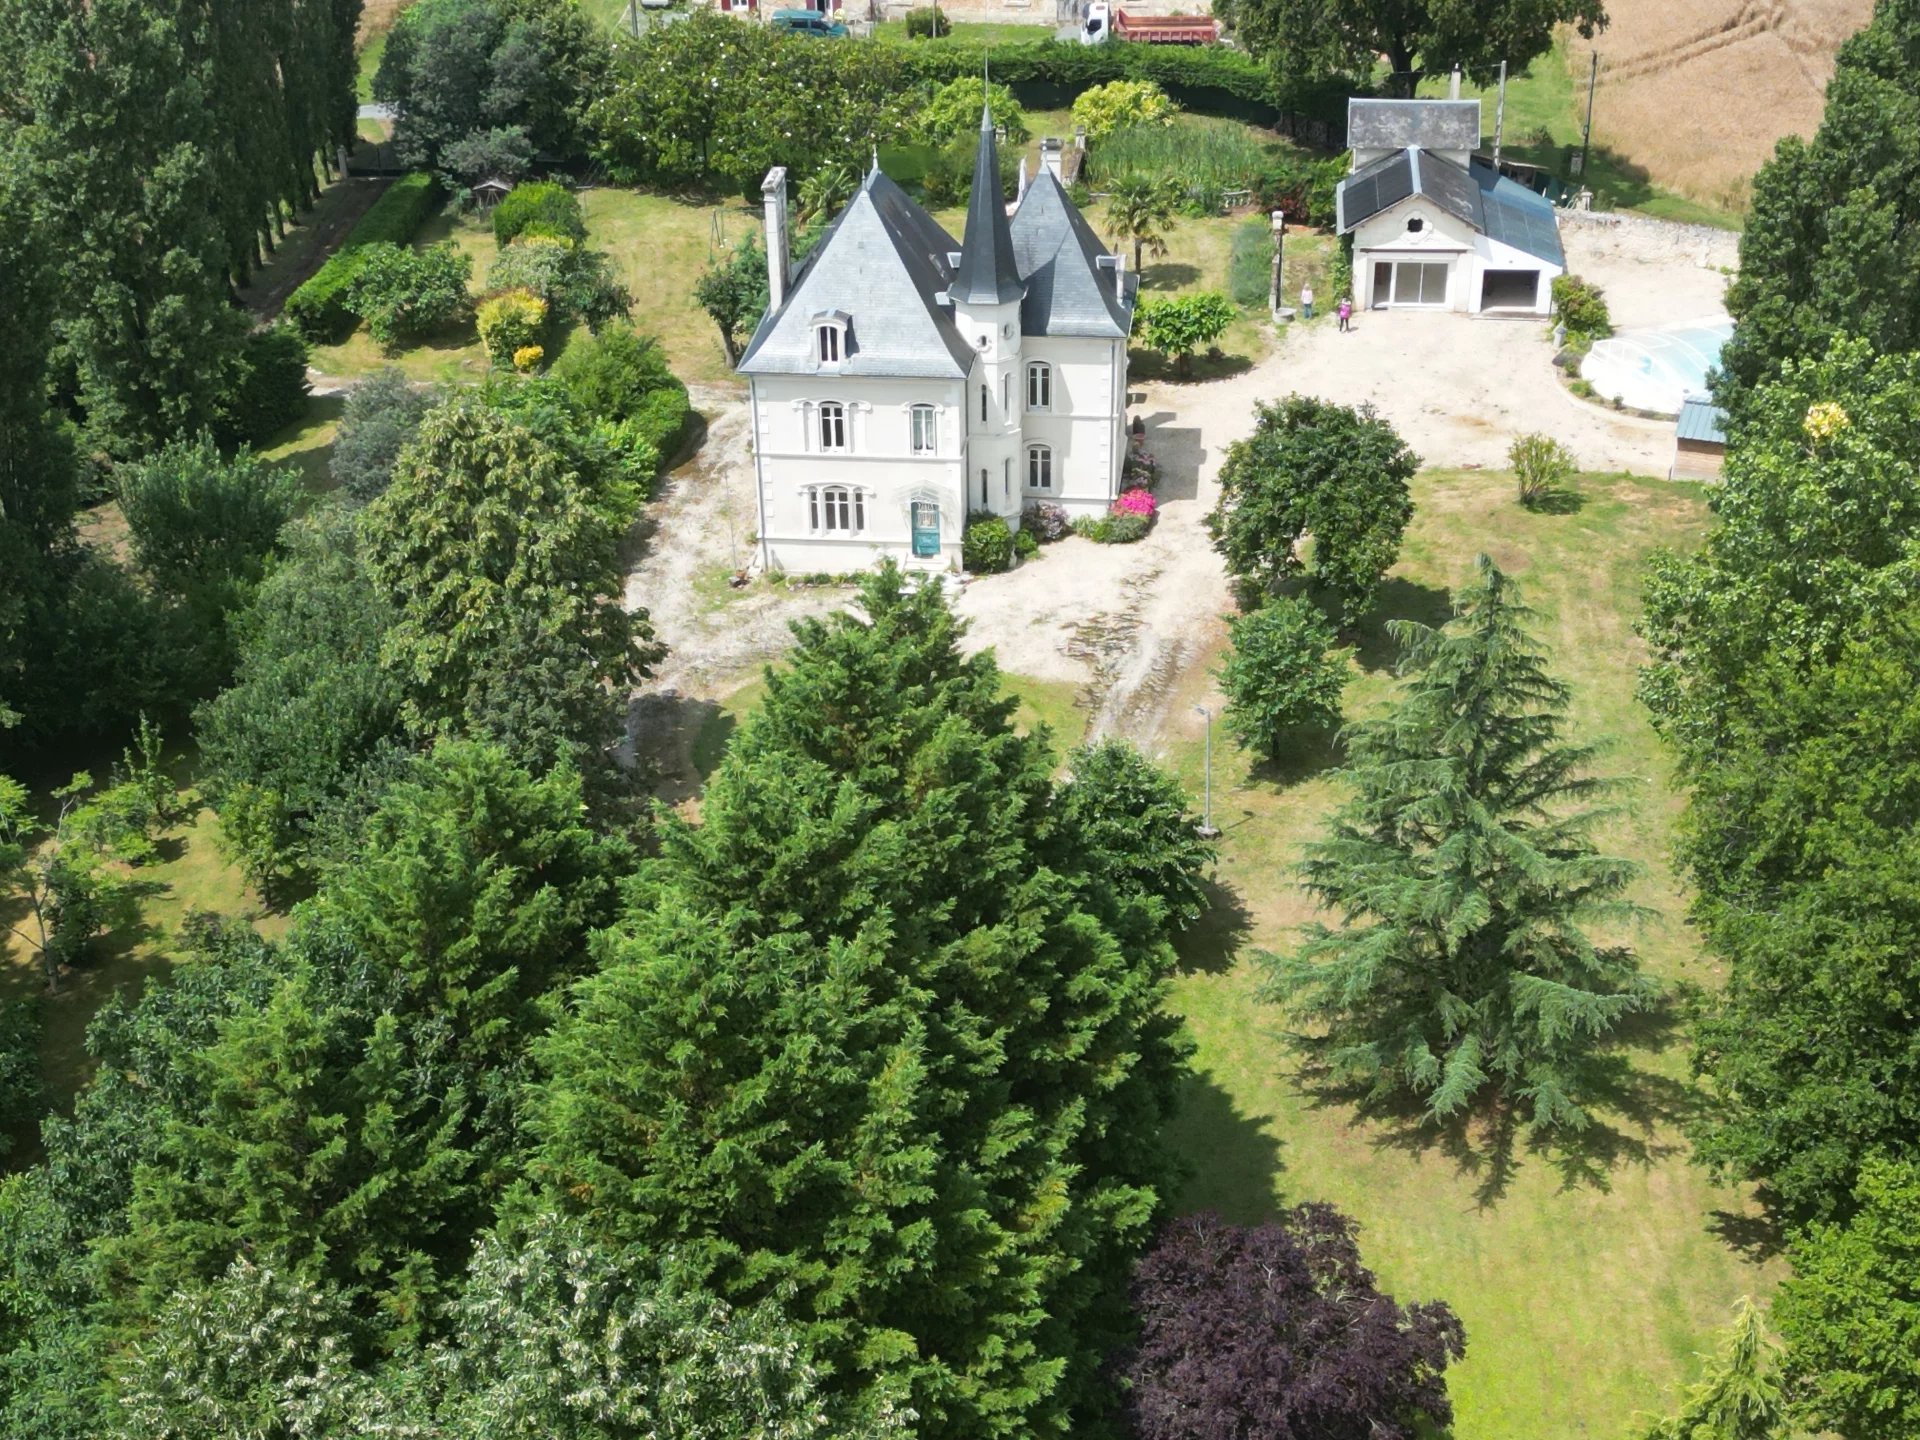 6 bed chateau with pool and guest house in its own park